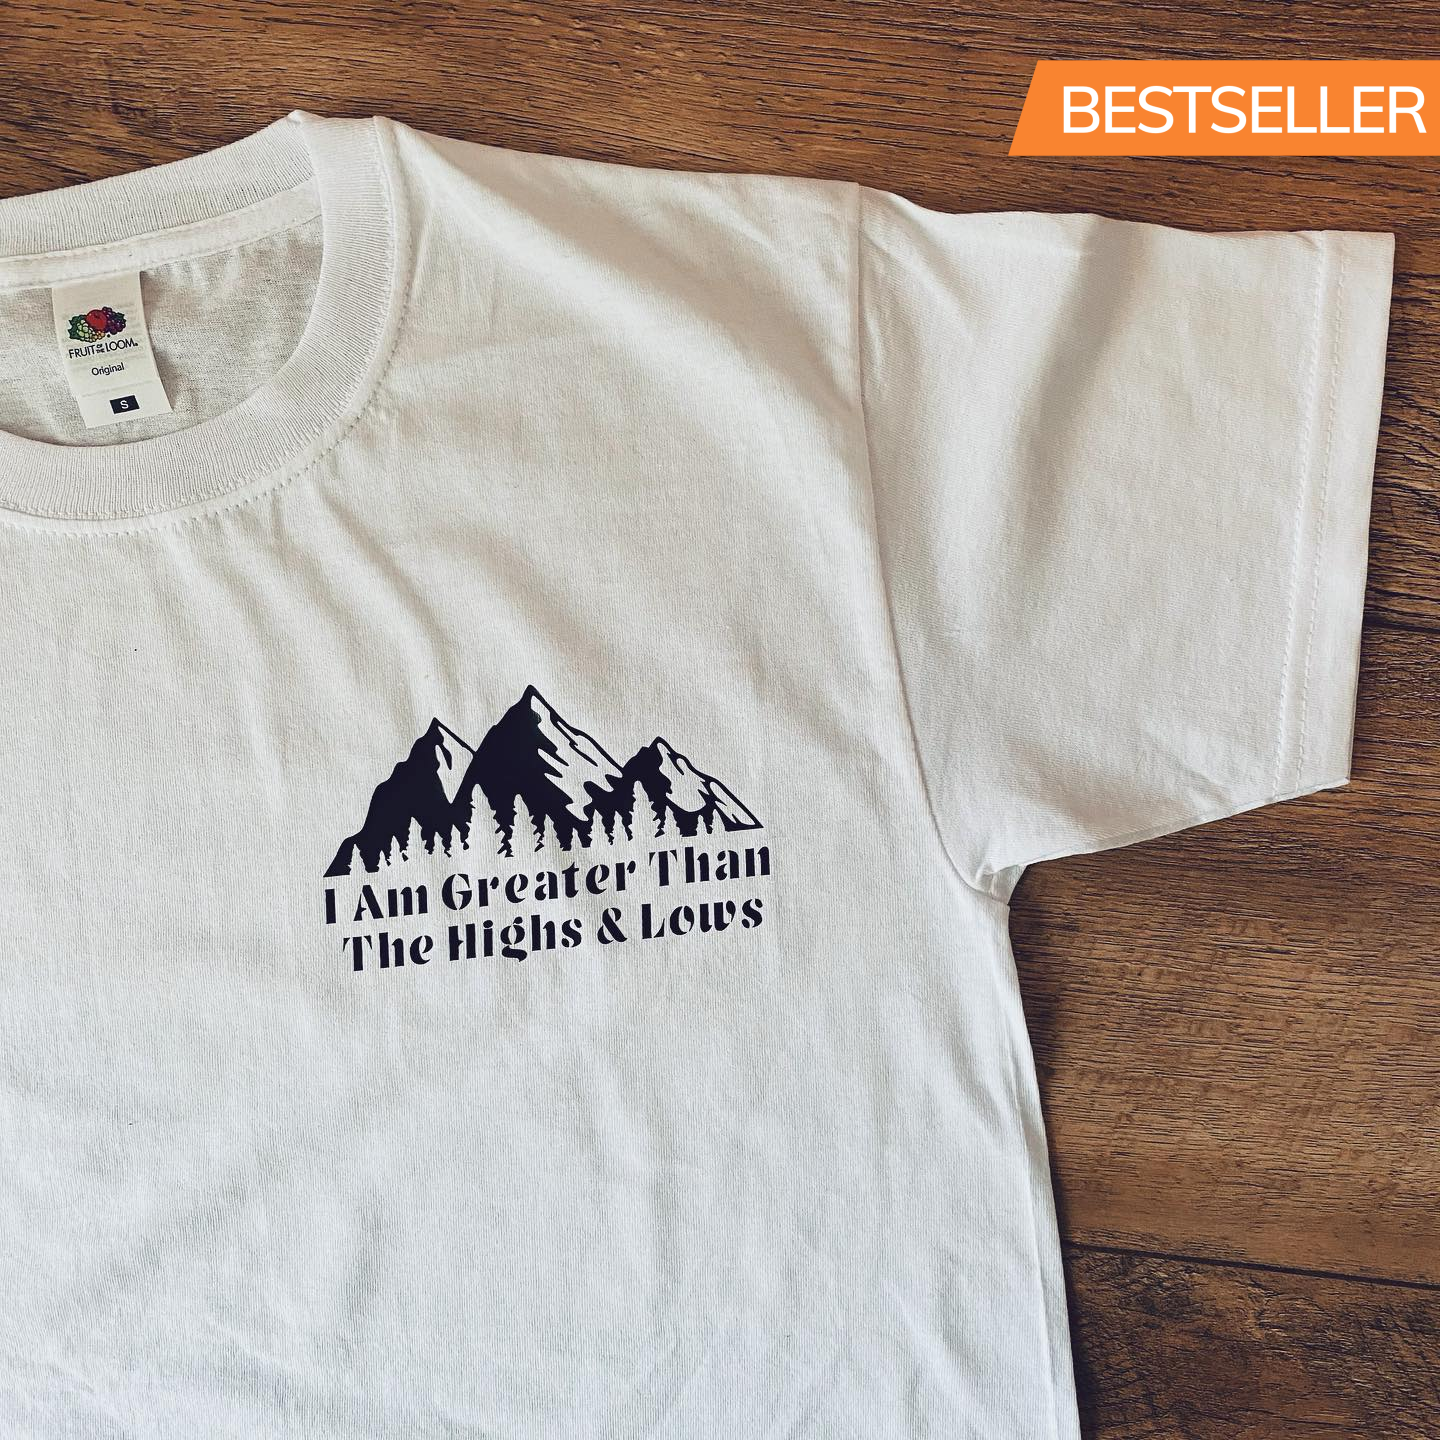 I Am Greater Than The Highs & Lows T Shirt